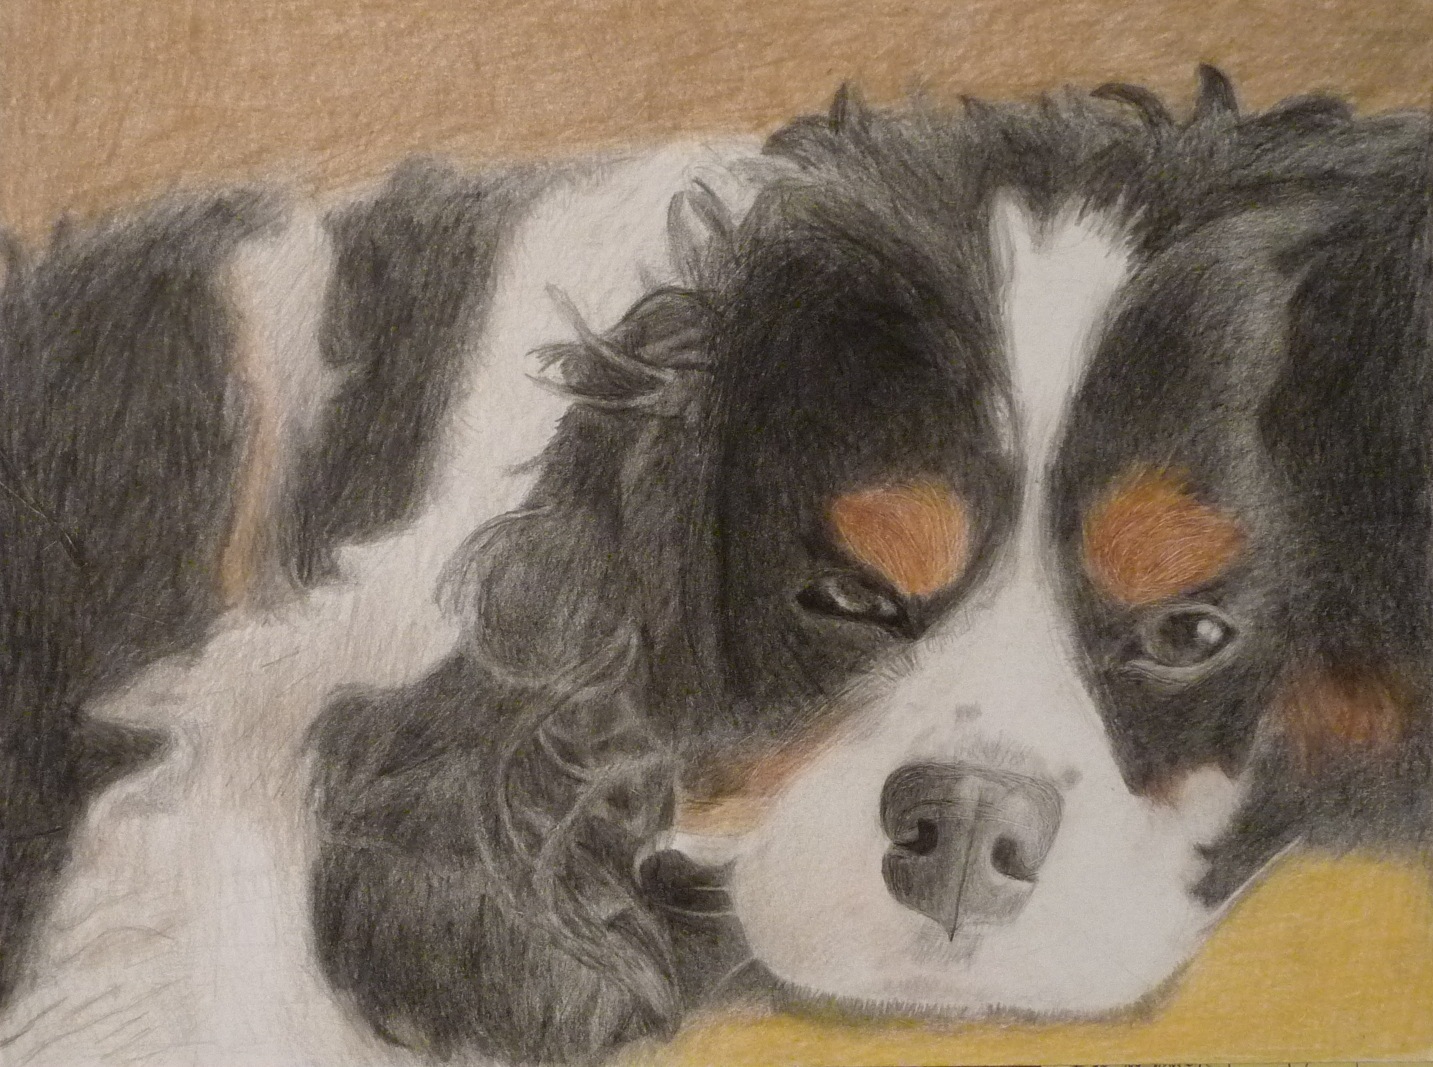 View Image Details Ruth's Charlie - colored pencil